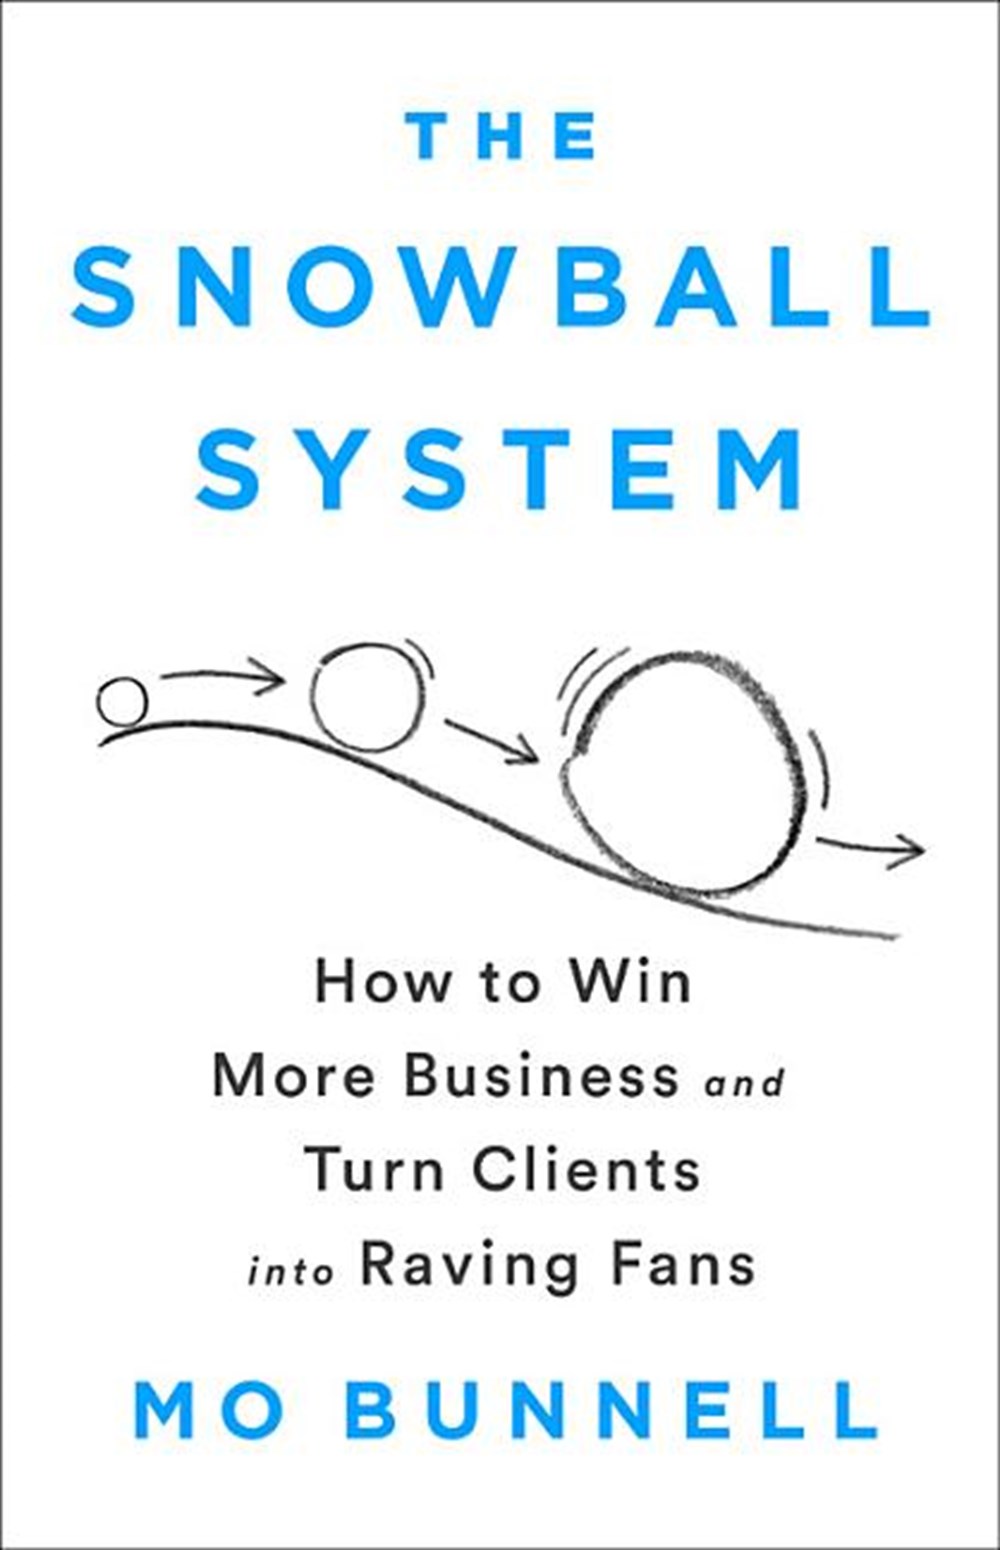 Snowball System How to Win More Business and Turn Clients Into Raving Fans